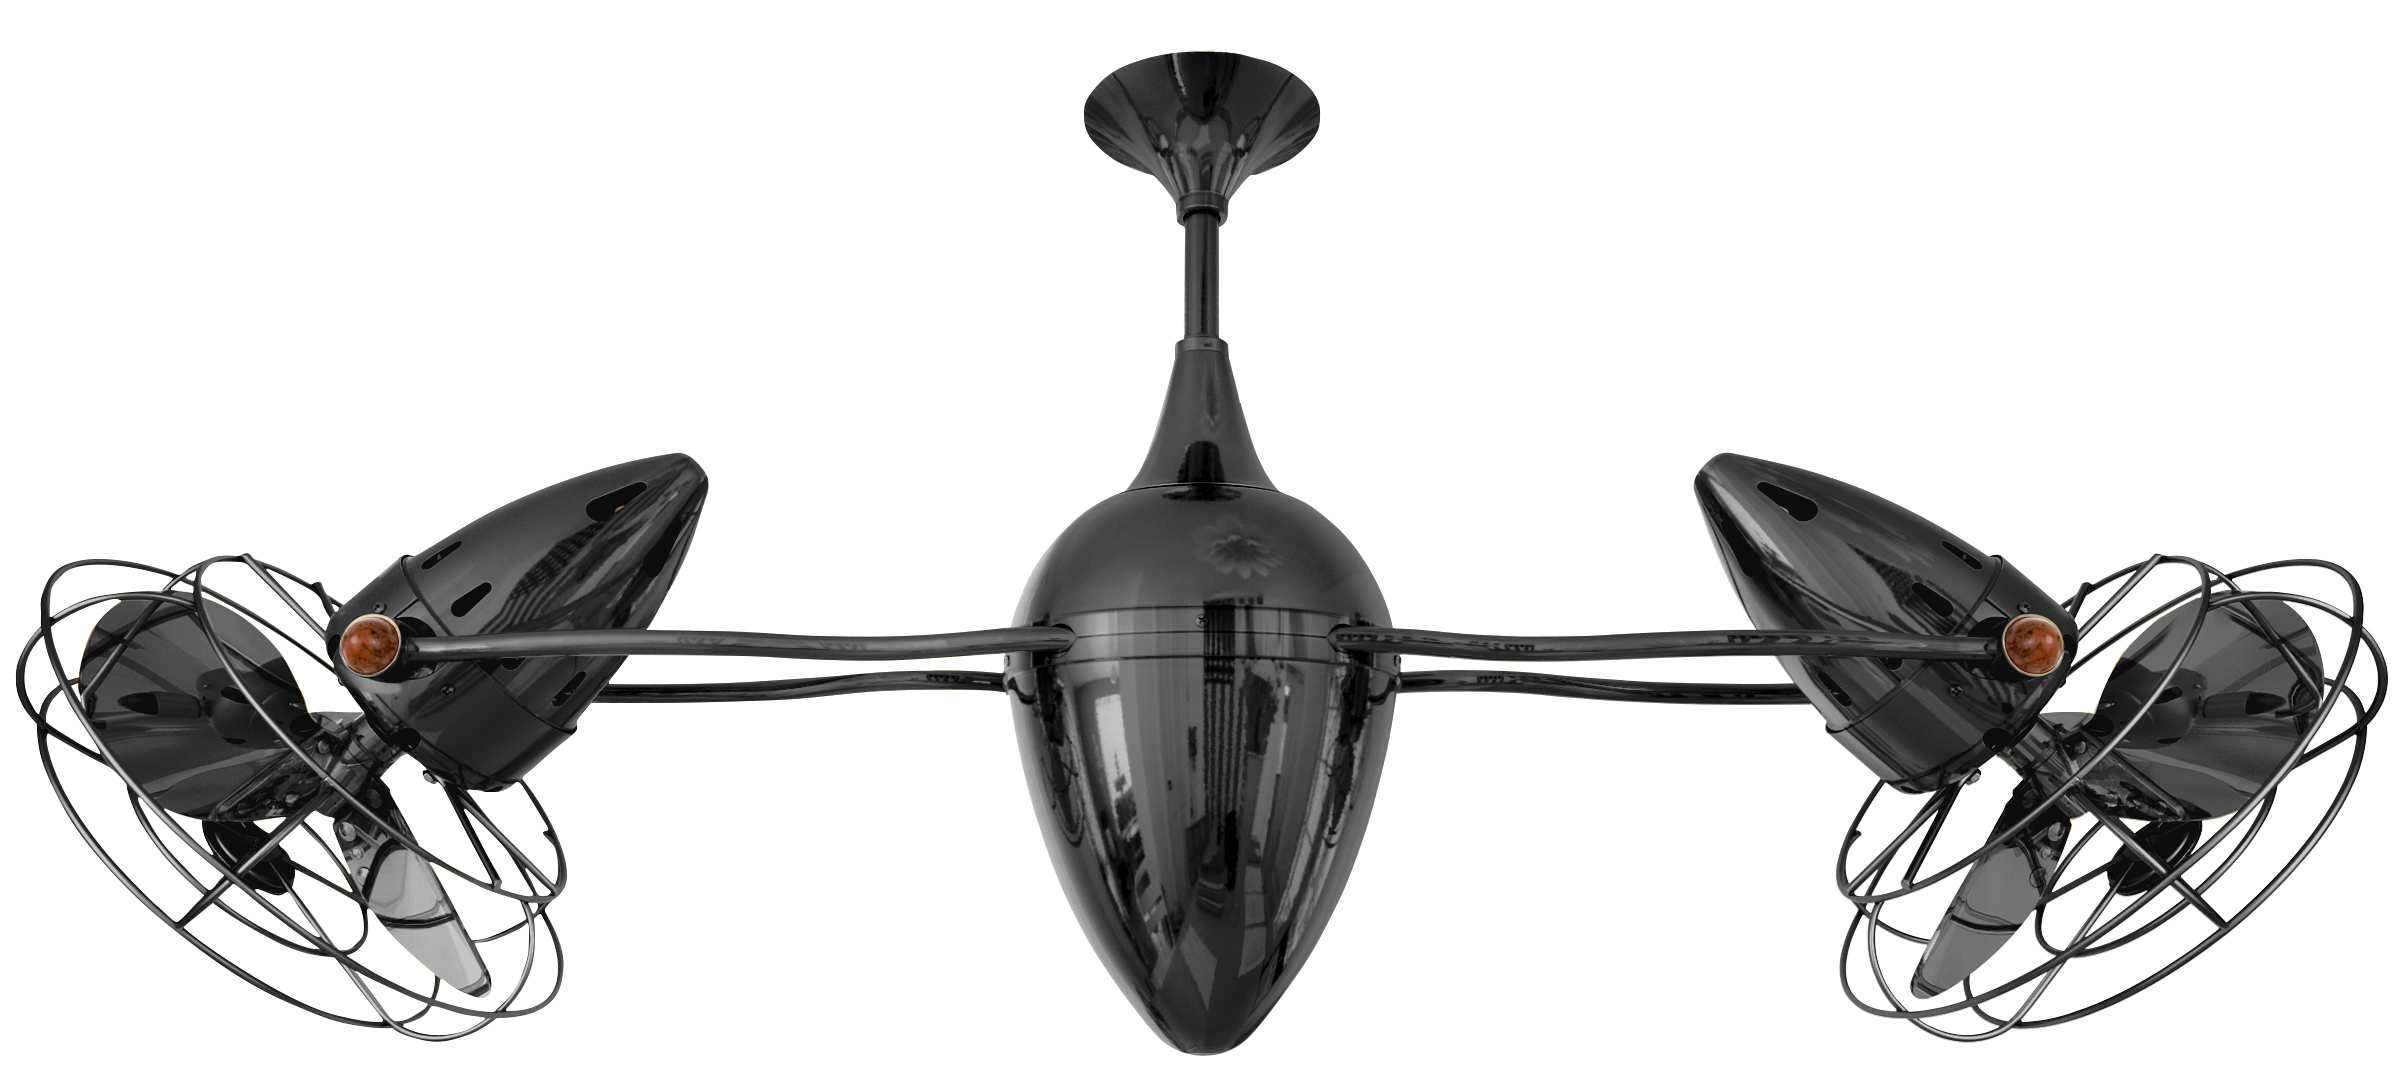 Ar Ruthiane dual headed rotational ceiling fan in black nickel finish with metal blades and decorative cage made by Matthews Fan Company.